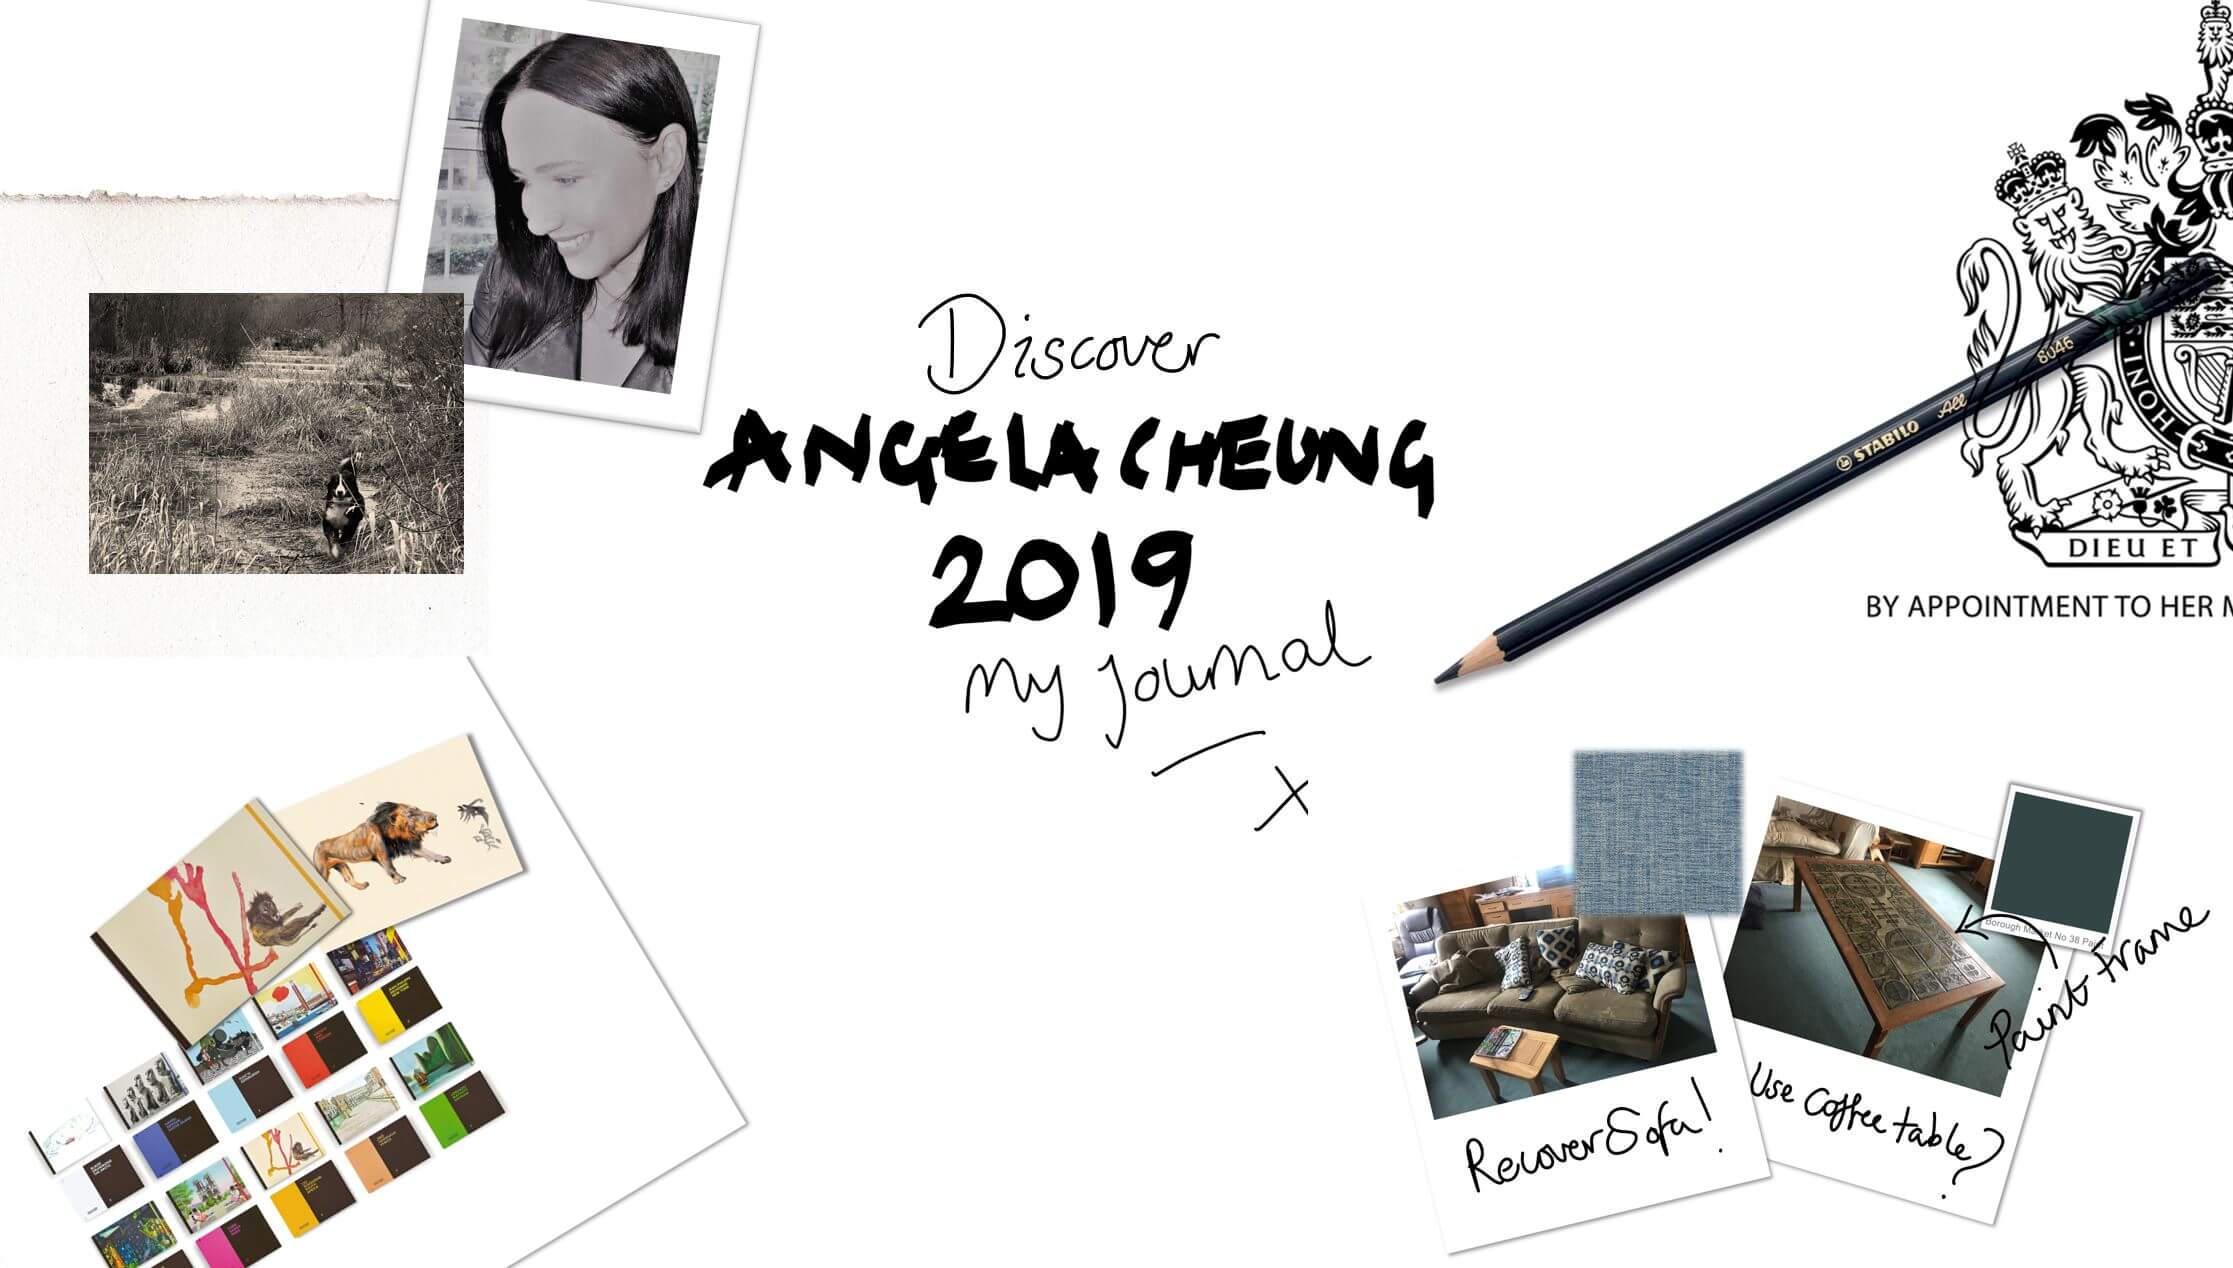 Collage of images from Angela Cheung 2019 journal